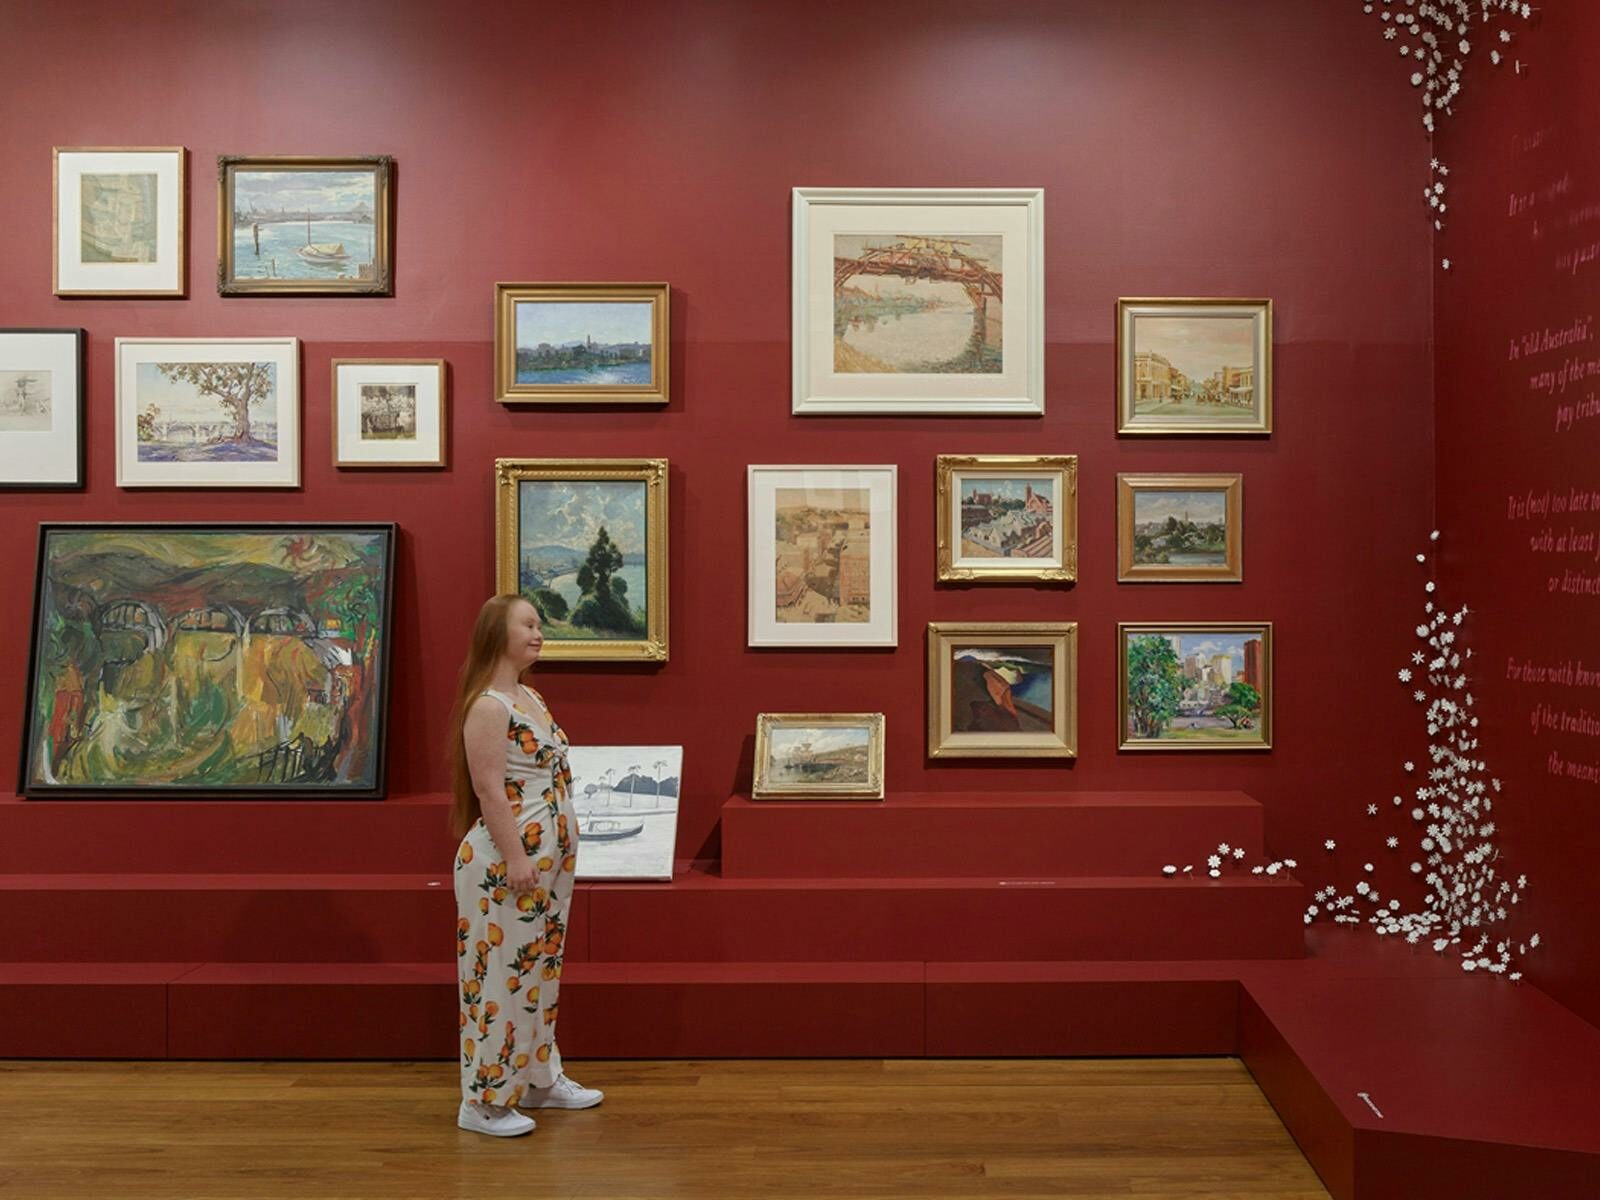 A person in a gallery space with dark red walls looks up at a collection of paintings.